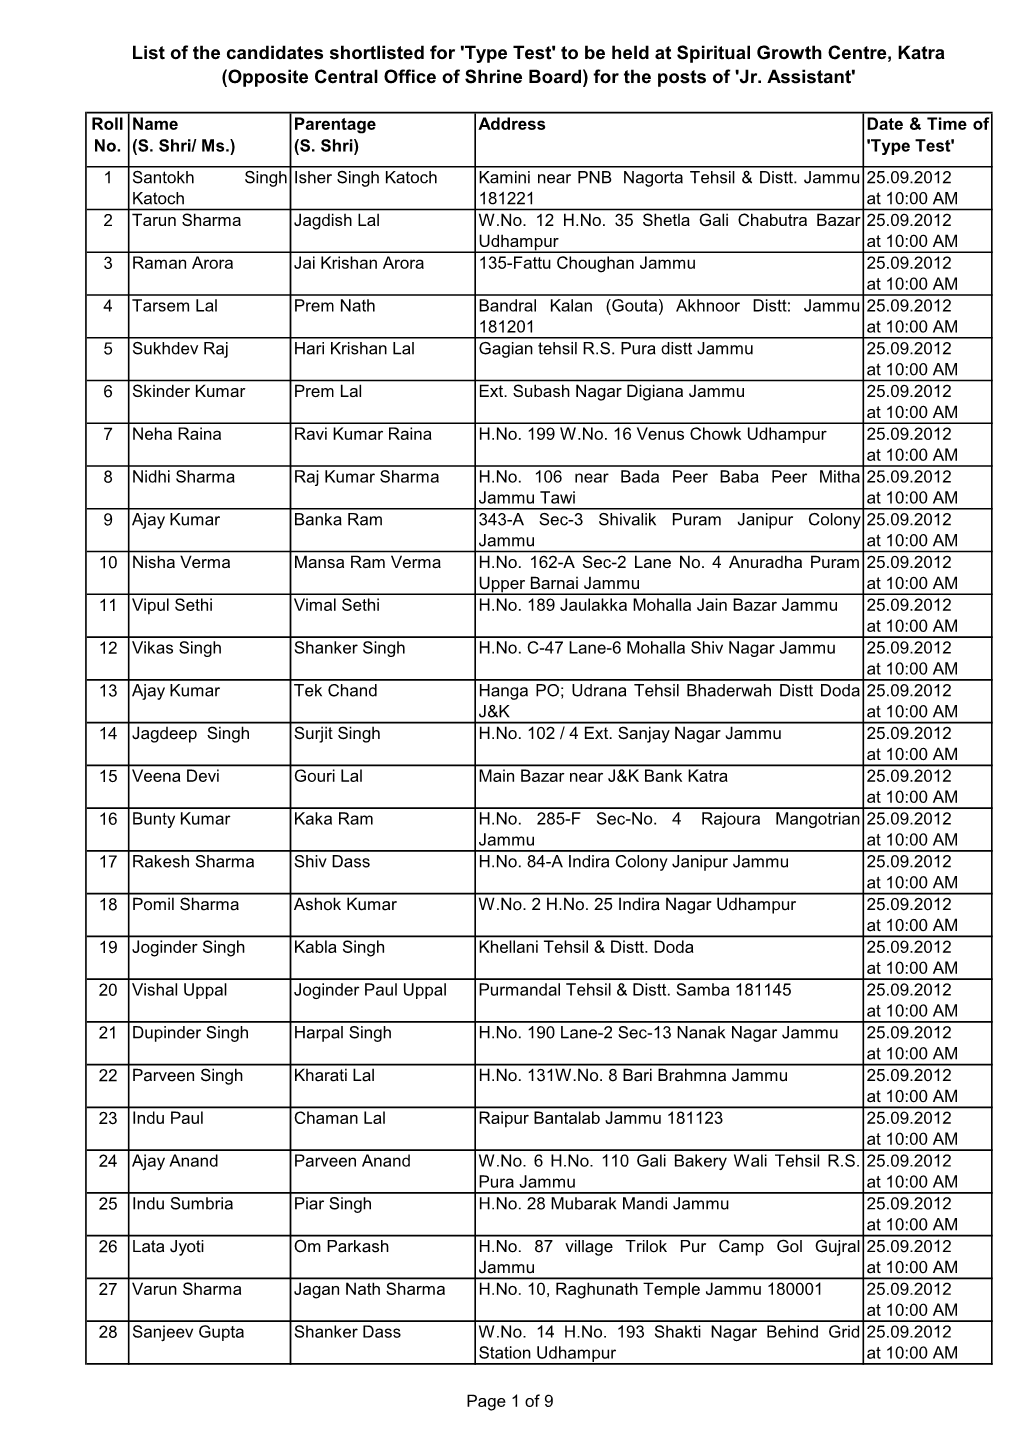 List of the Candidates Shortlisted for 'Type Test' to Be Held at Spiritual Growth Centre, Katra (Opposite Central Office of Shrine Board) for the Posts of 'Jr